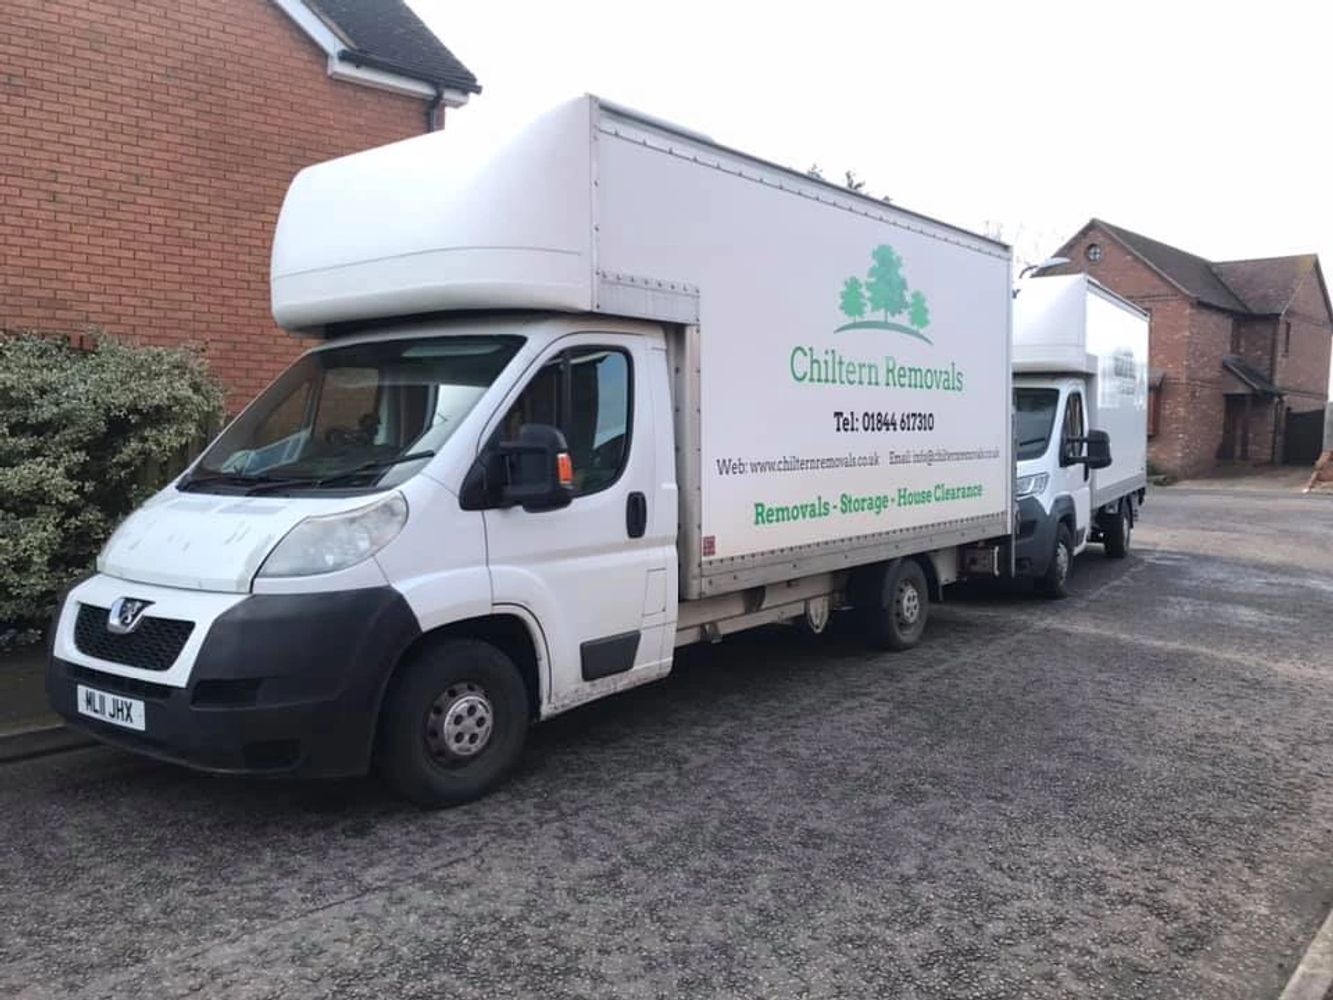 Removals company Thame providing house removals and house clearances in Oxford